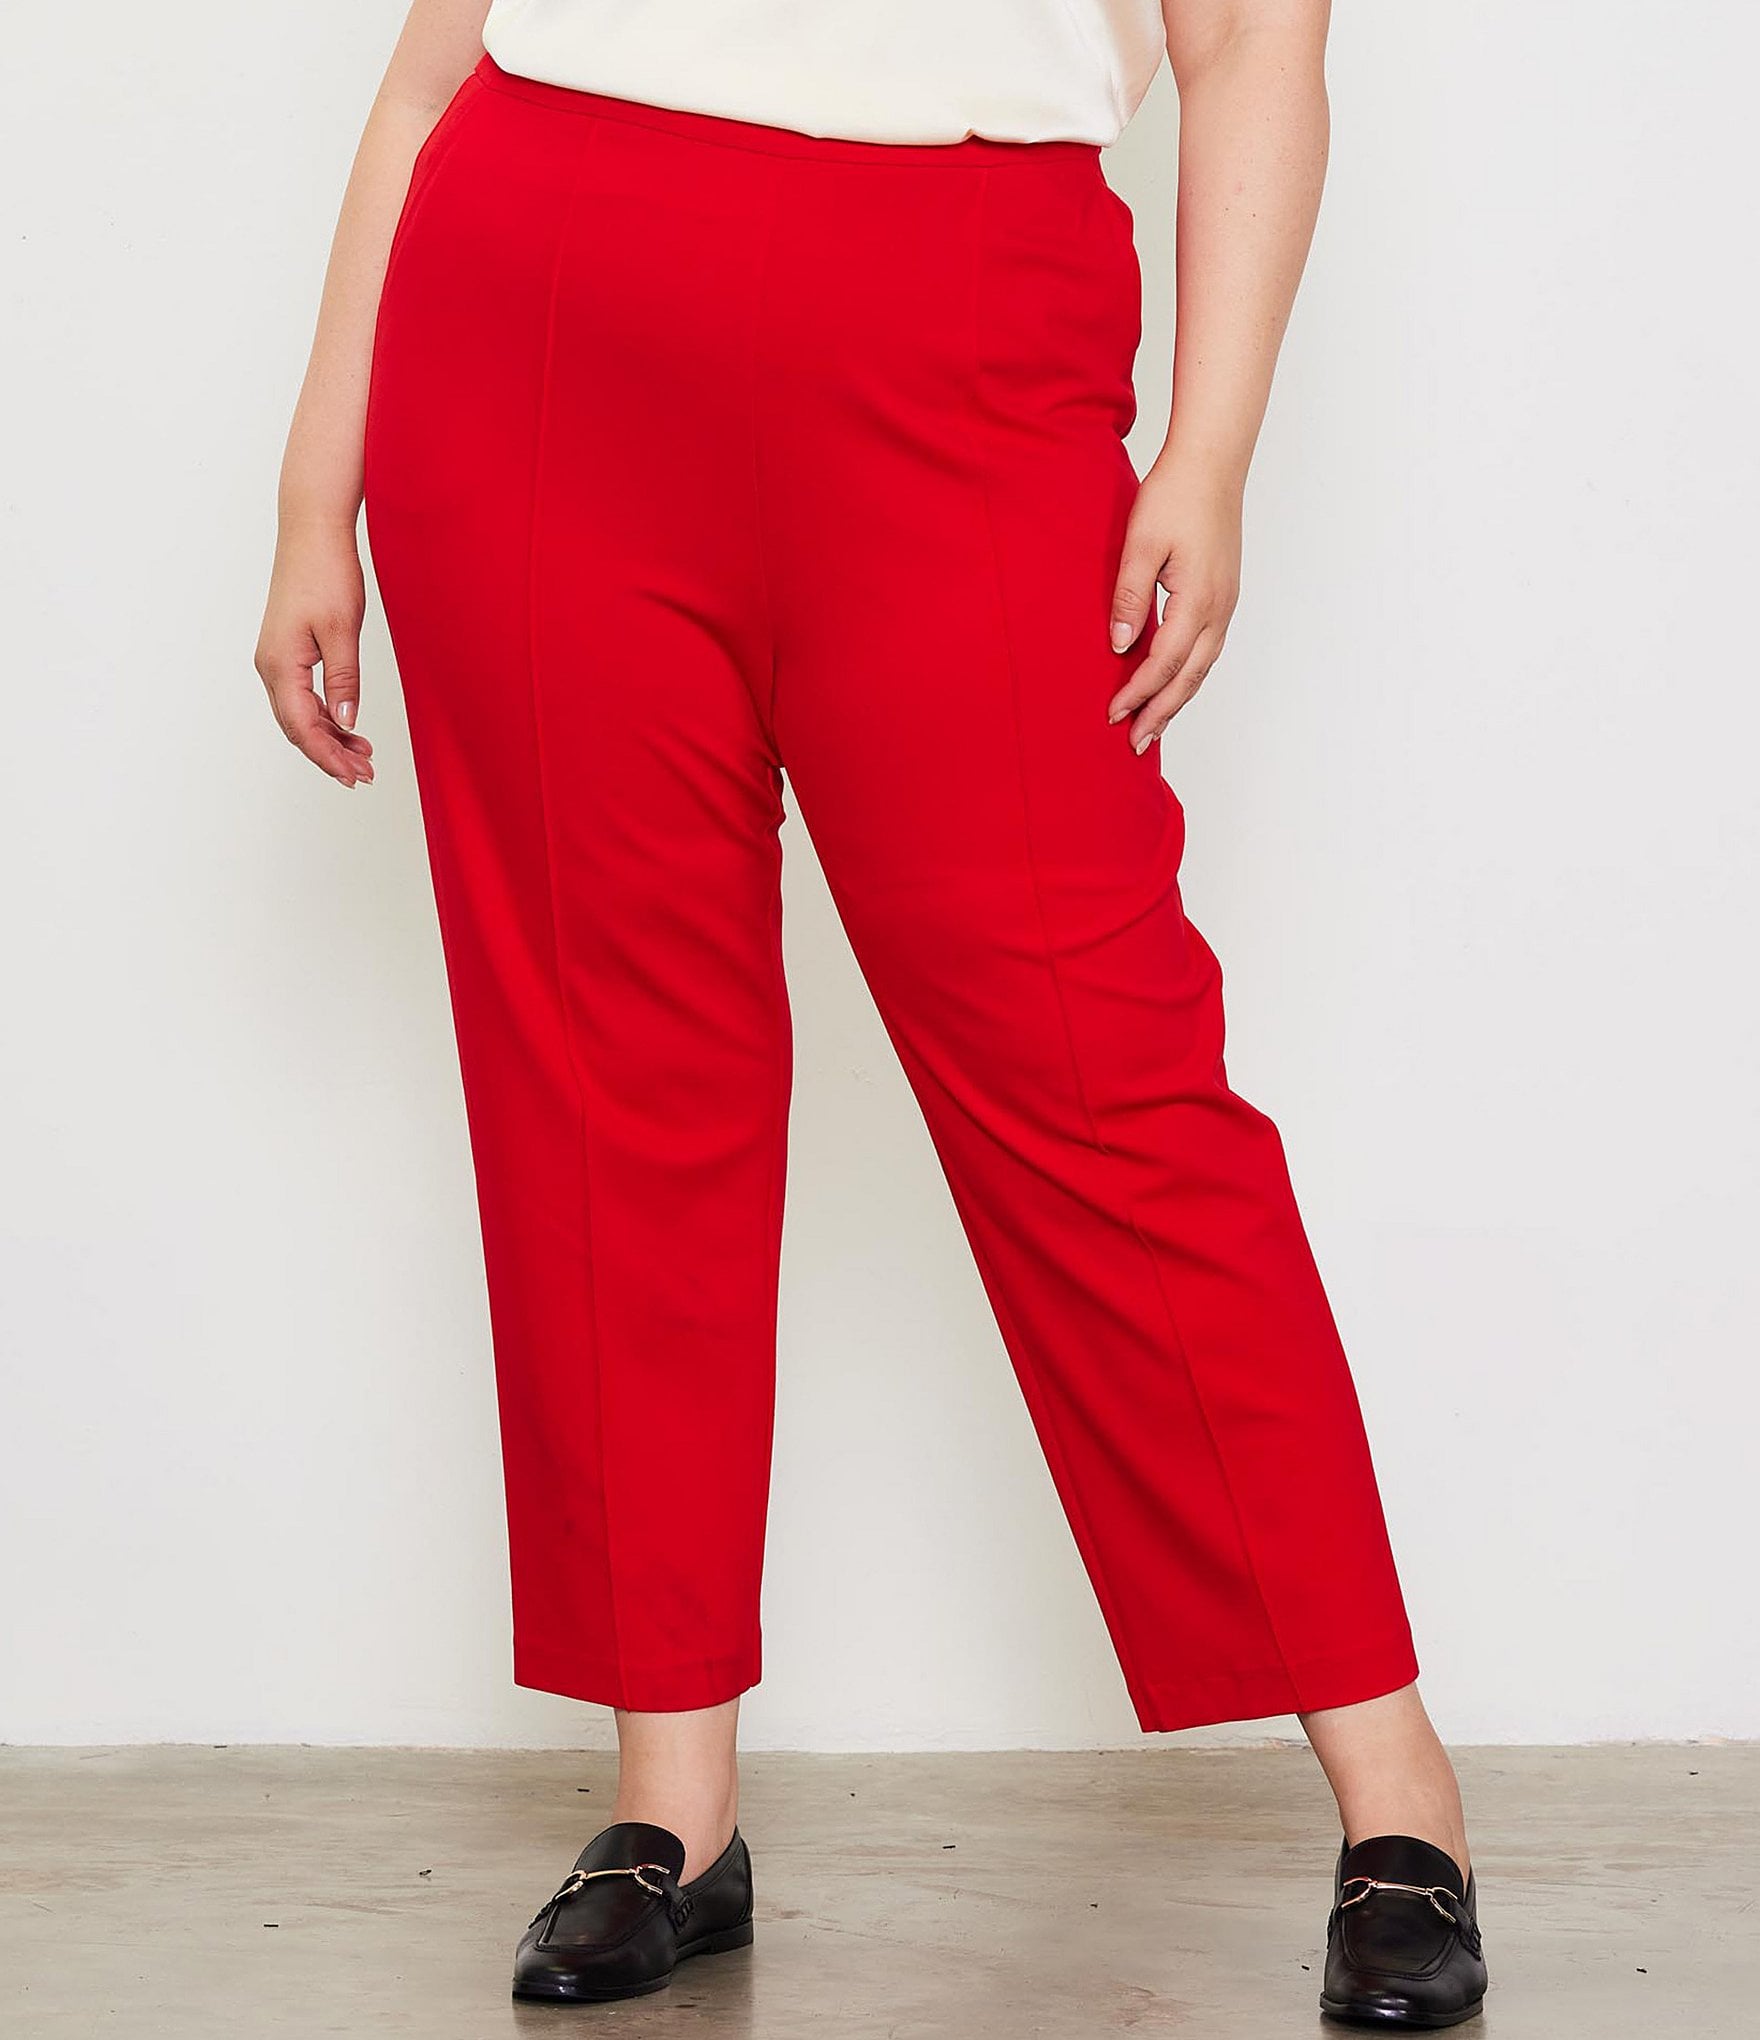 high waisted pants: Women's Plus Size Clothing